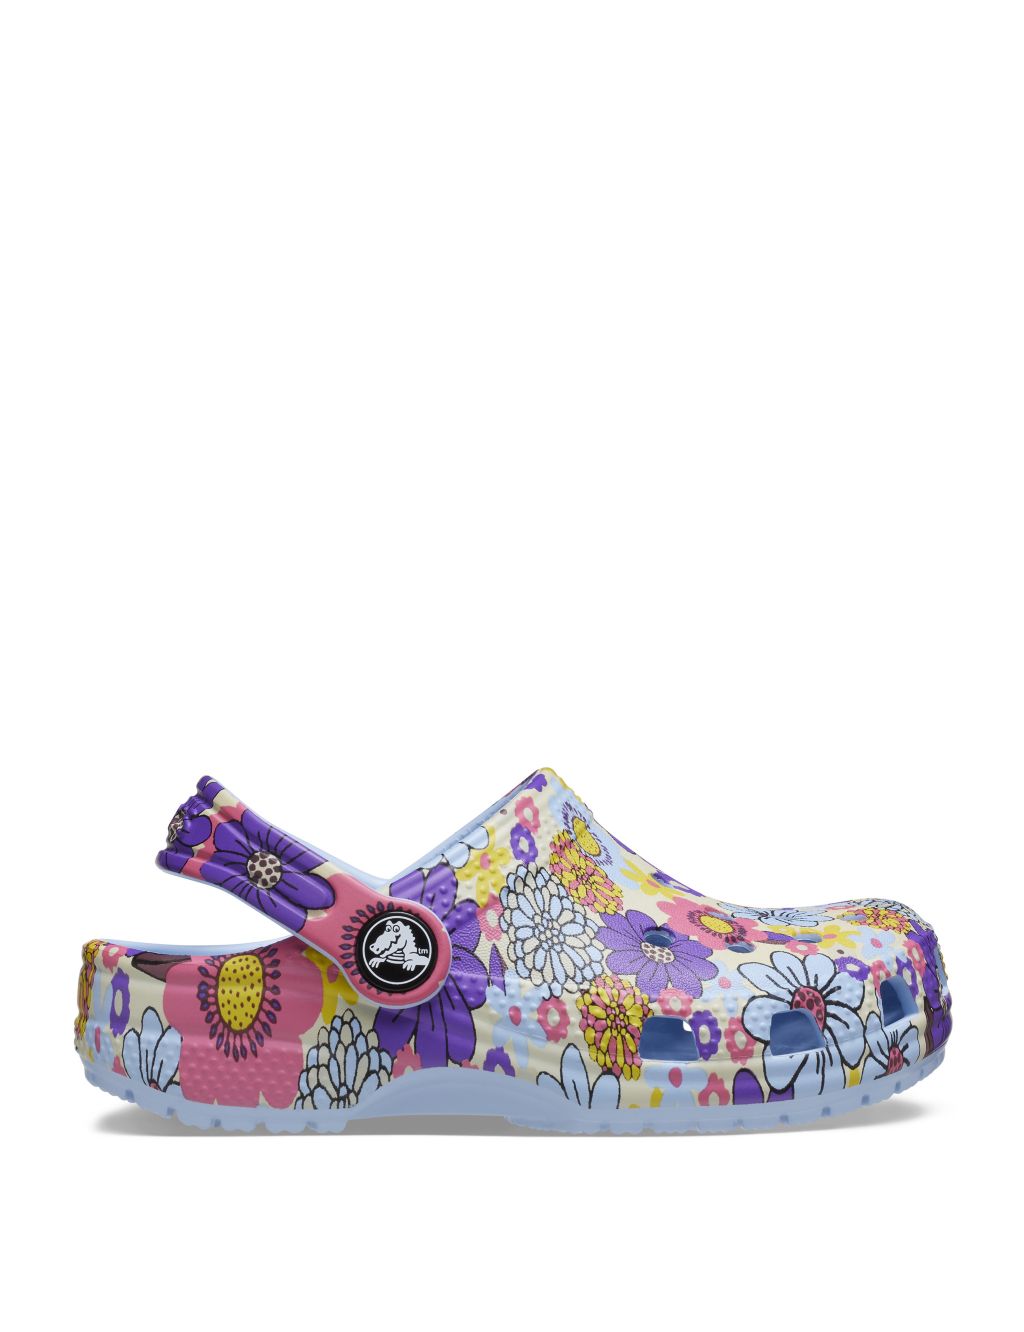 Kids' Classic Retro Floral Clogs (4 Small - 10 Small) image 1